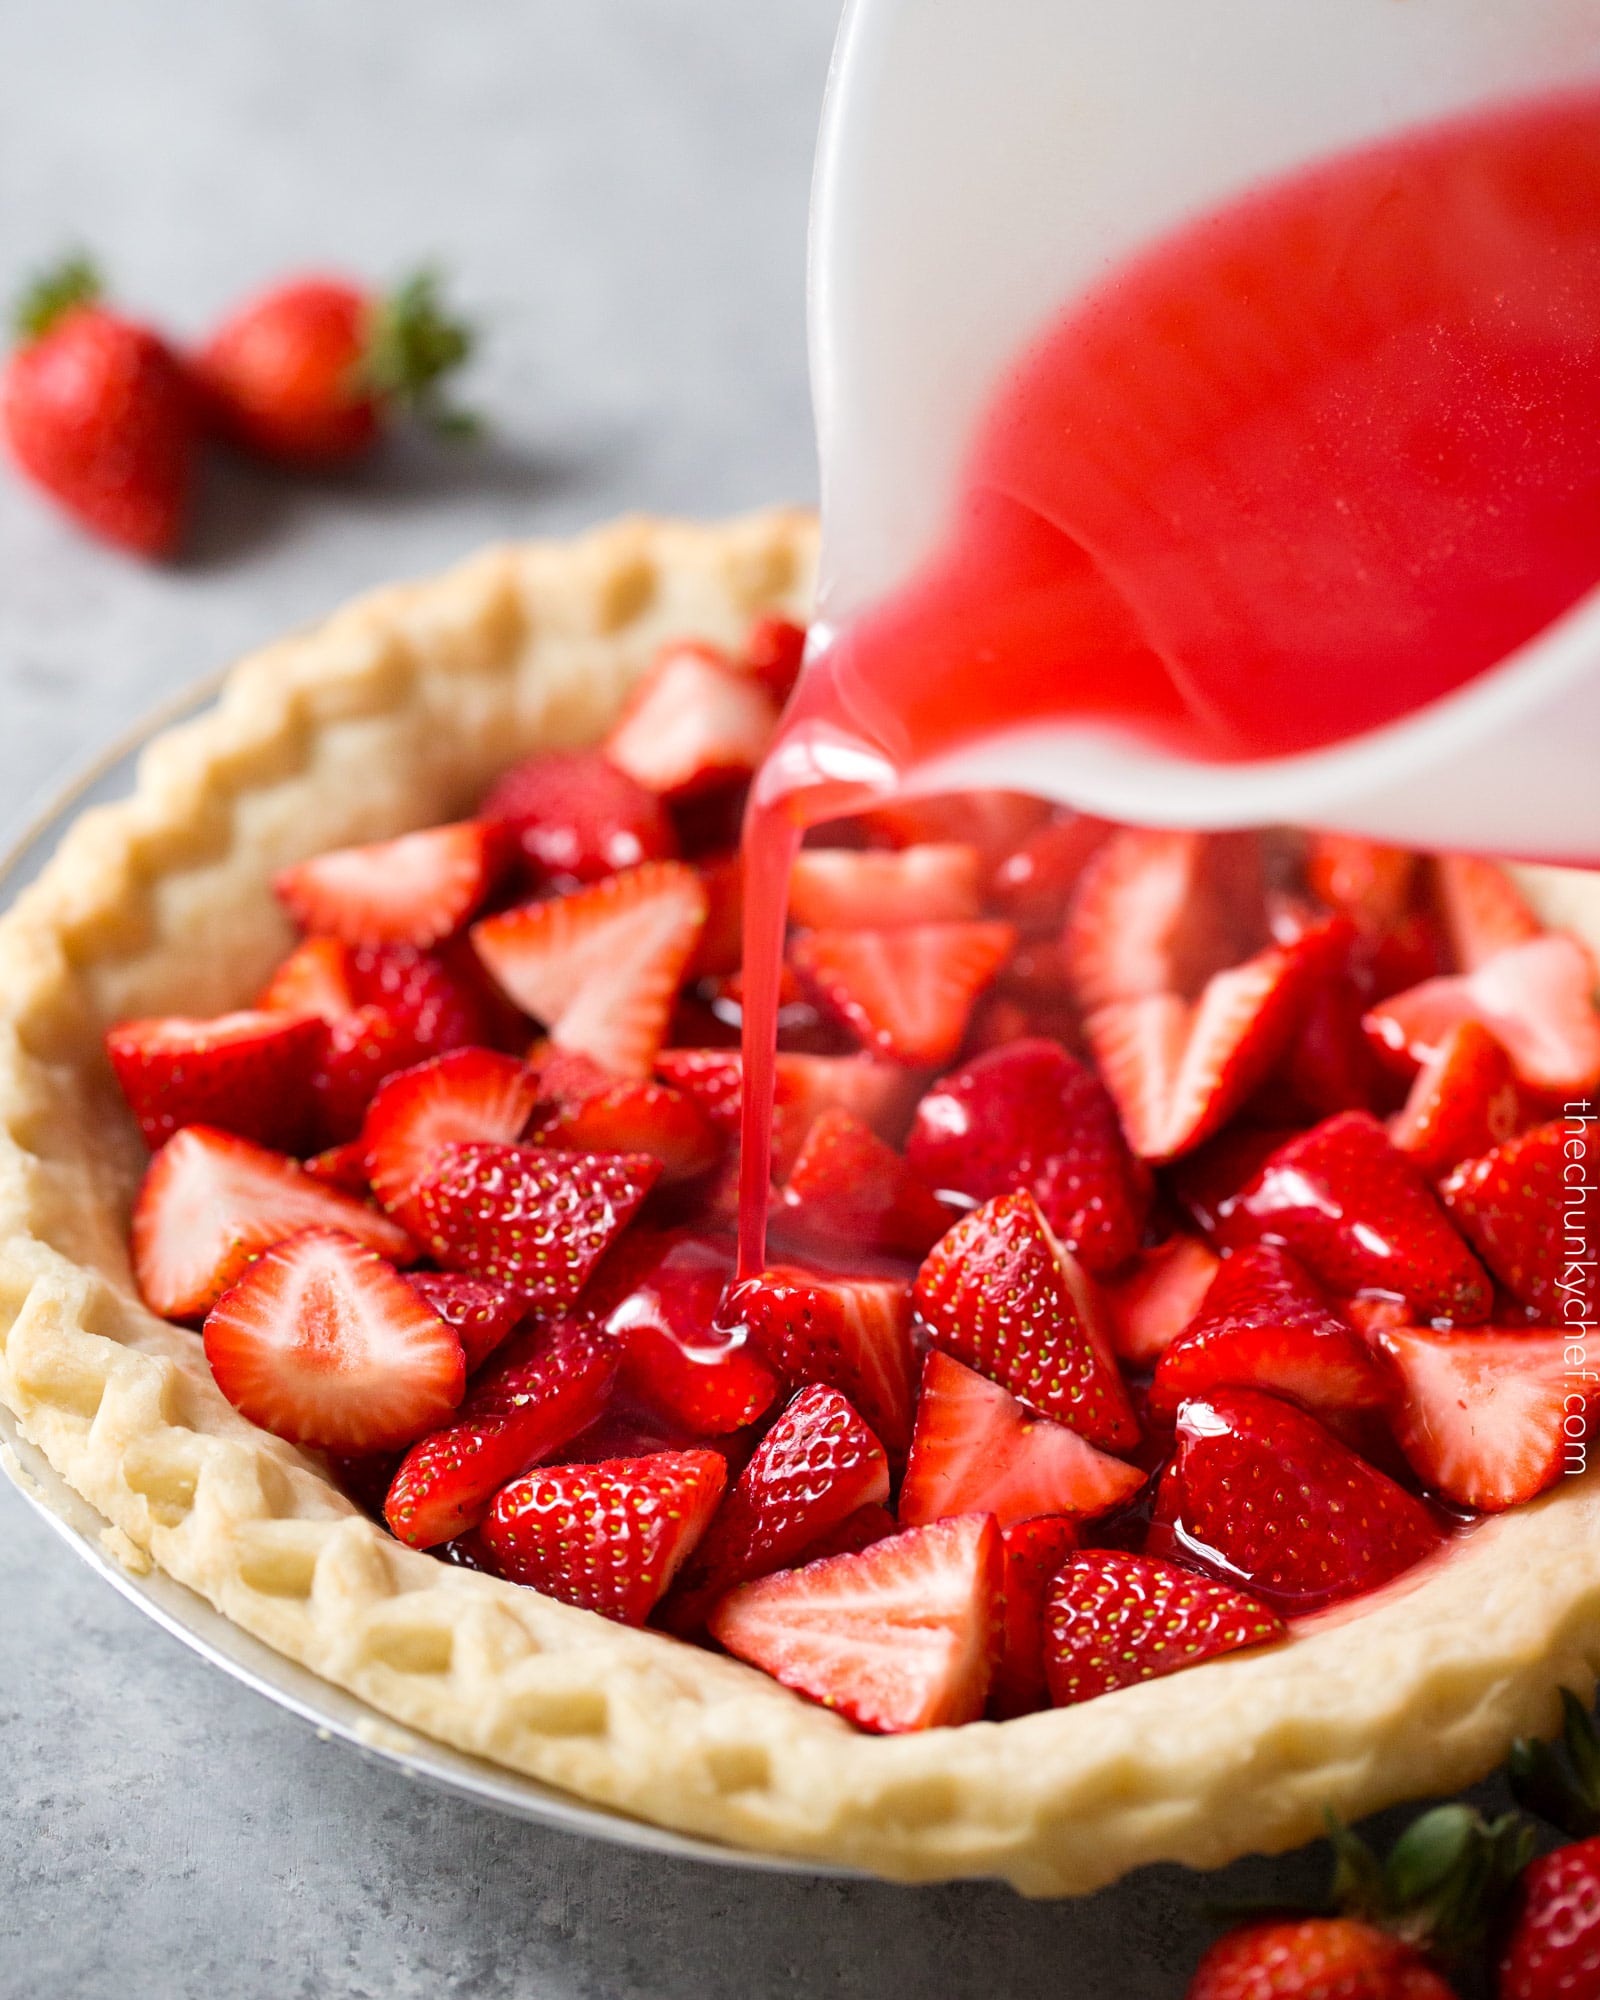 Copycat Frisch's Big Boy Strawberry Pie | This fresh strawberry pie tastes just like the pies from Frisch's Big Boy or Shoney's. It's easy to make, uses just 6 simple ingredients, and a frozen pie crust, for the easiest, tastiest strawberry pie ever! | http://thechunkychef.com